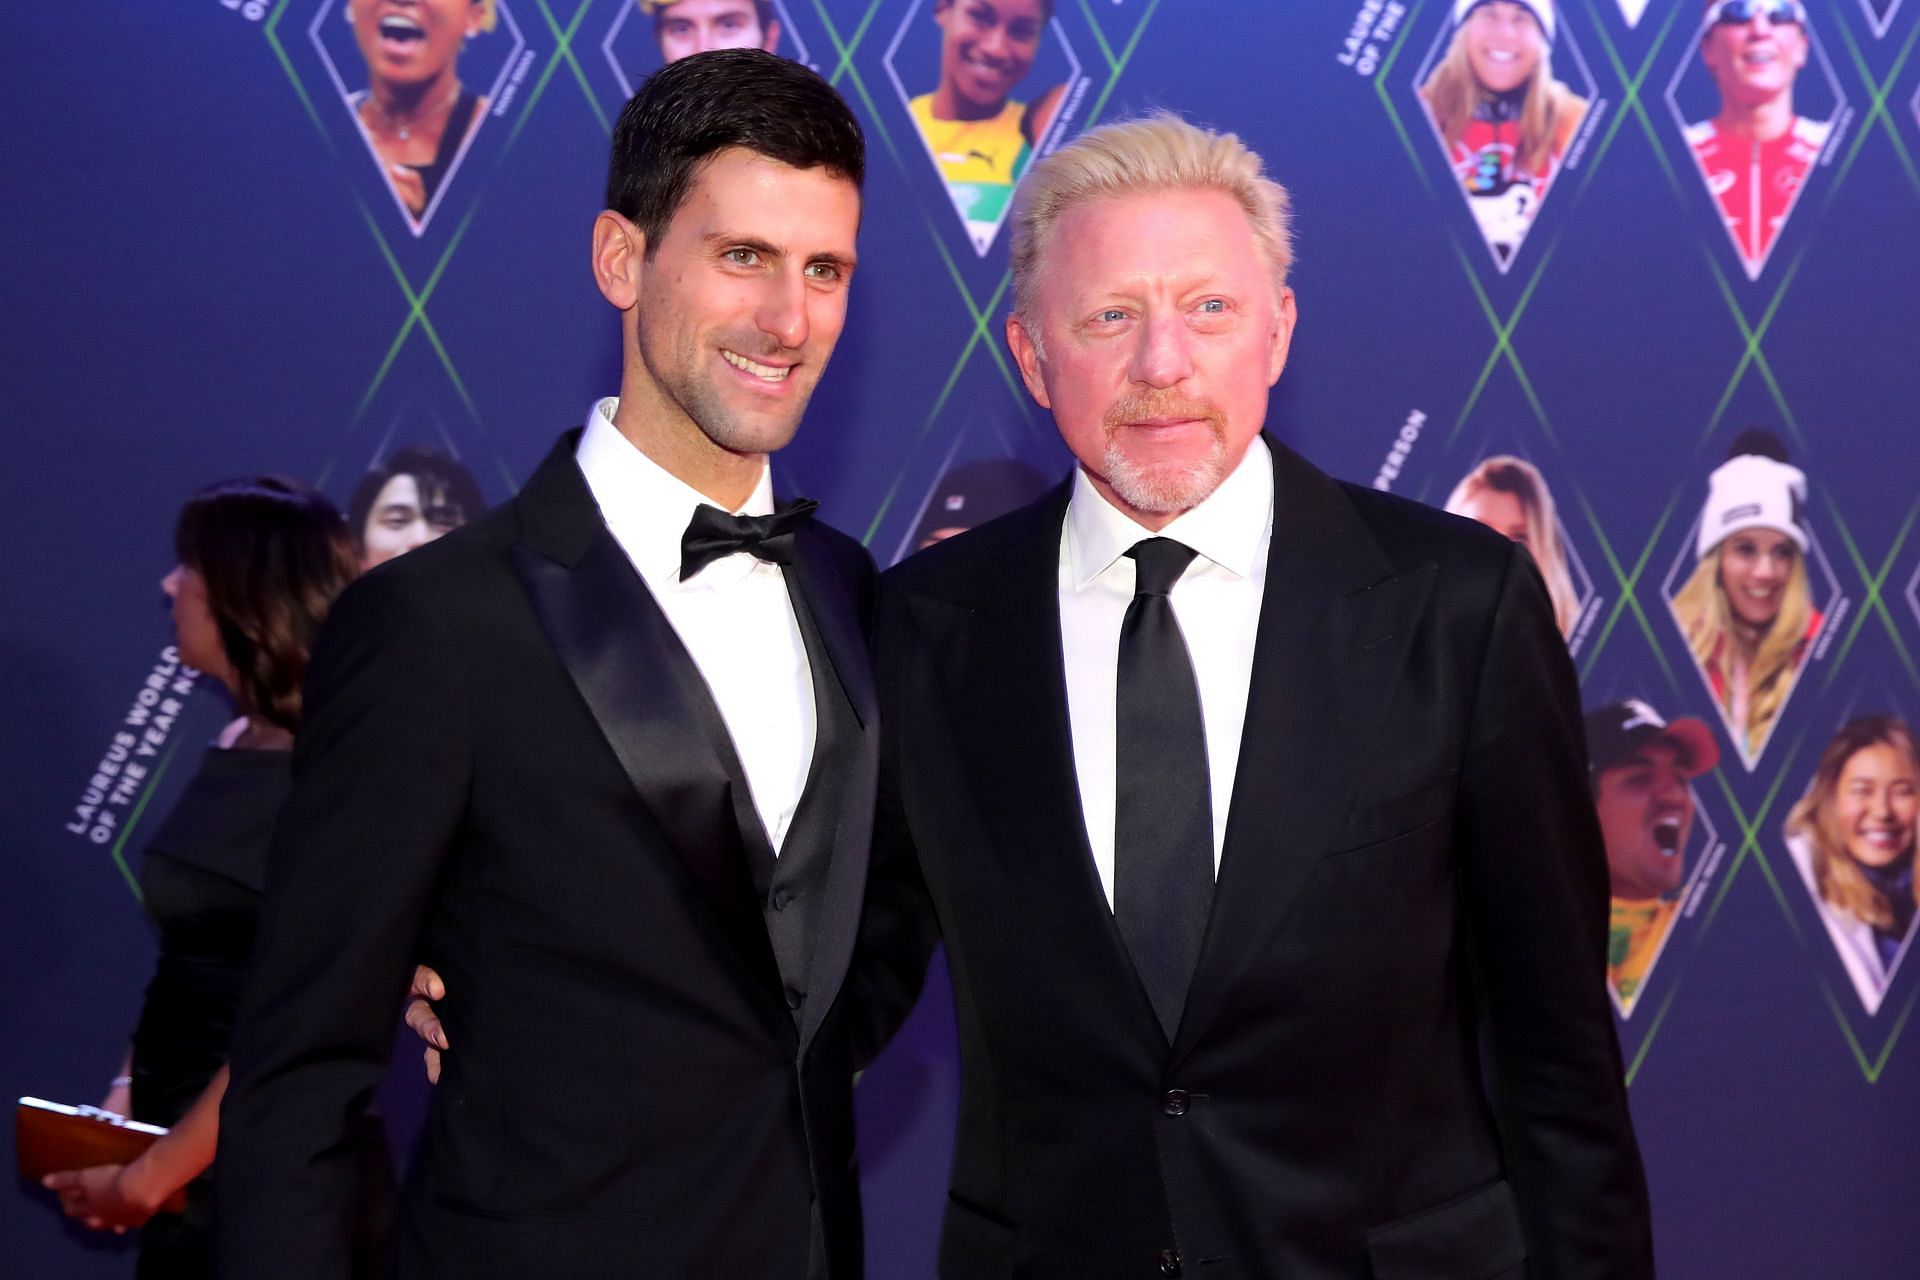 Becker and Djokovic pictured